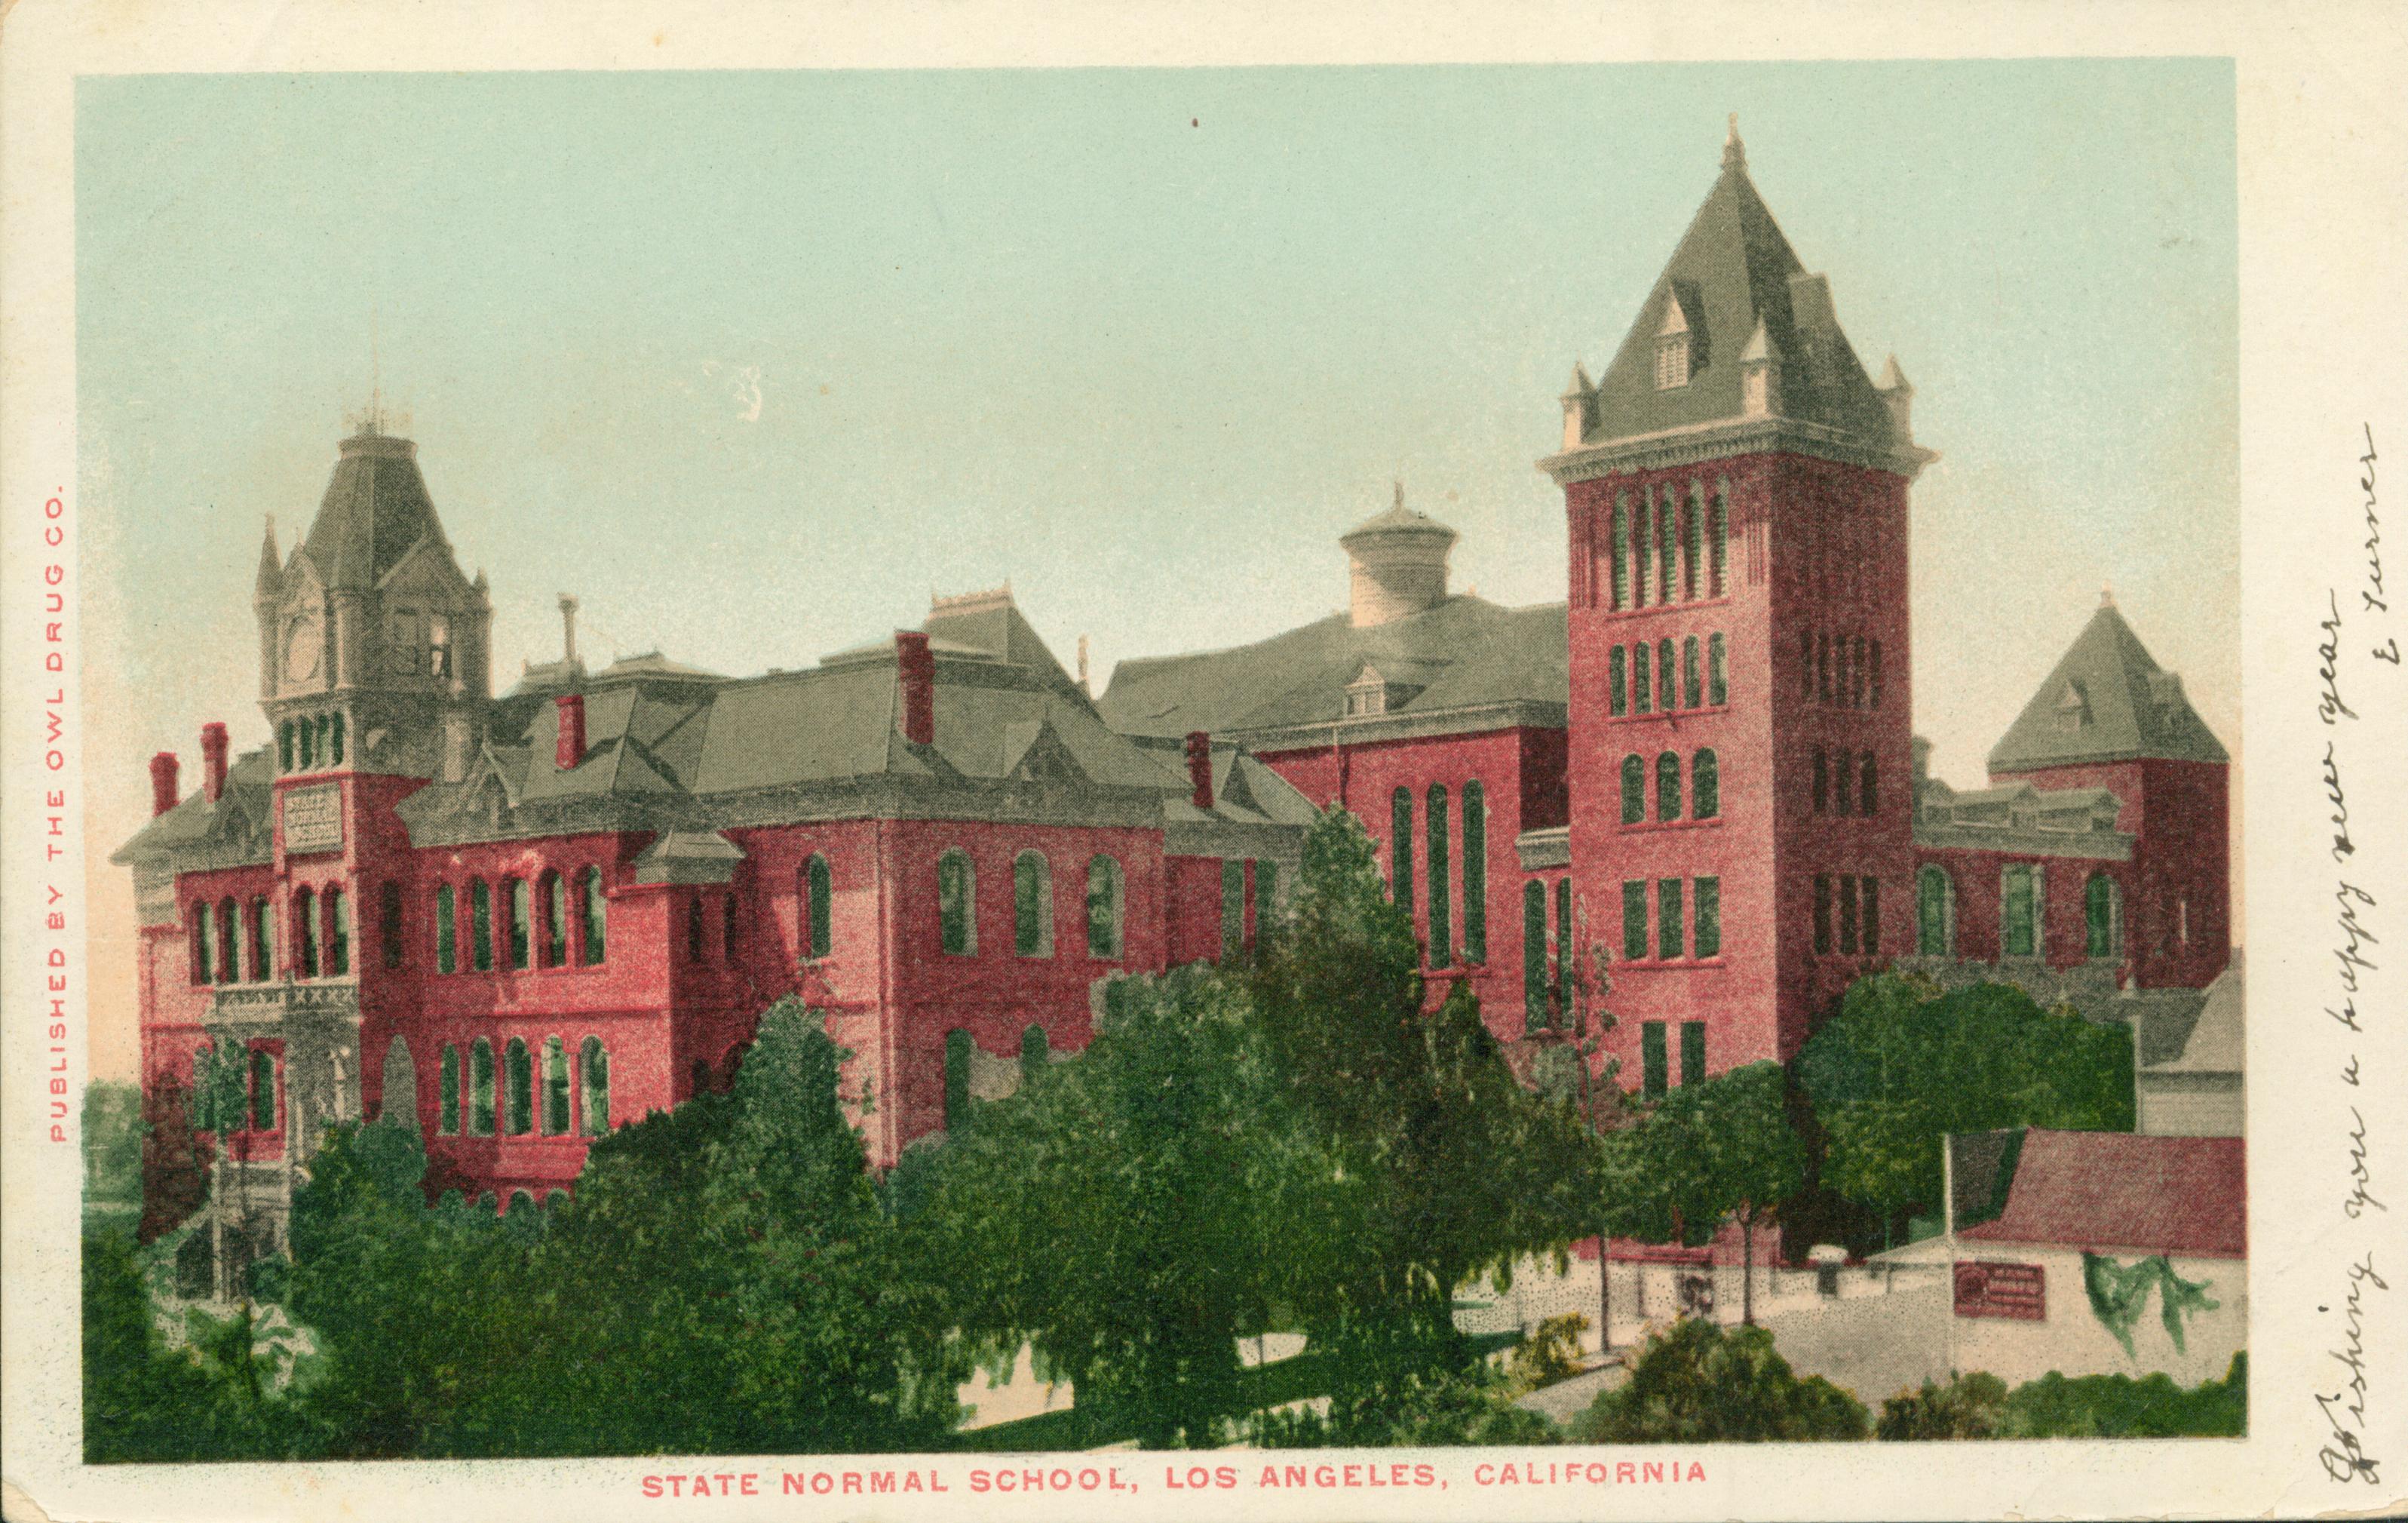 This postcard shows the State Normal School